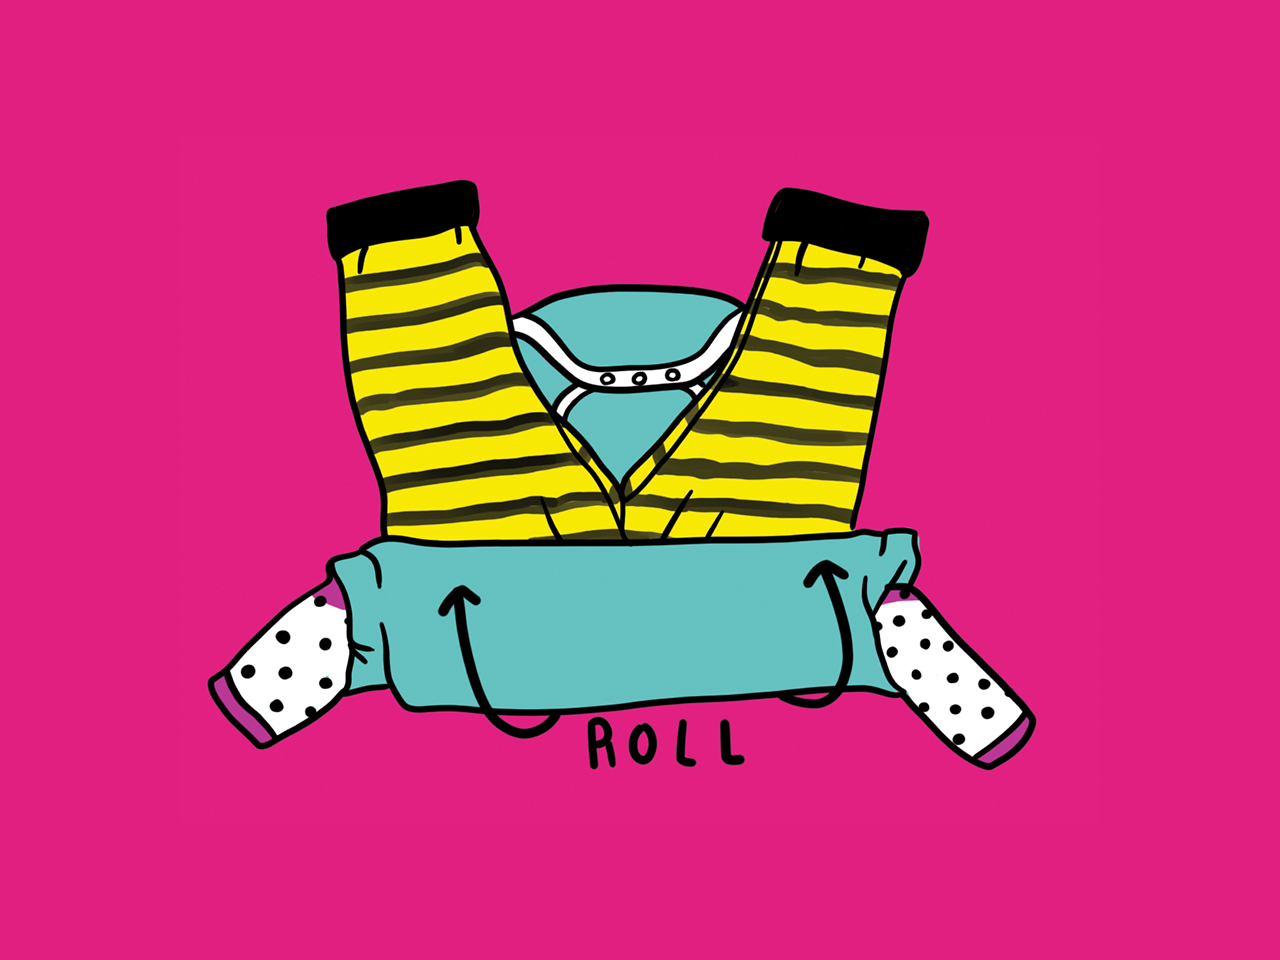 Illustration showing how to roll up baby clothes